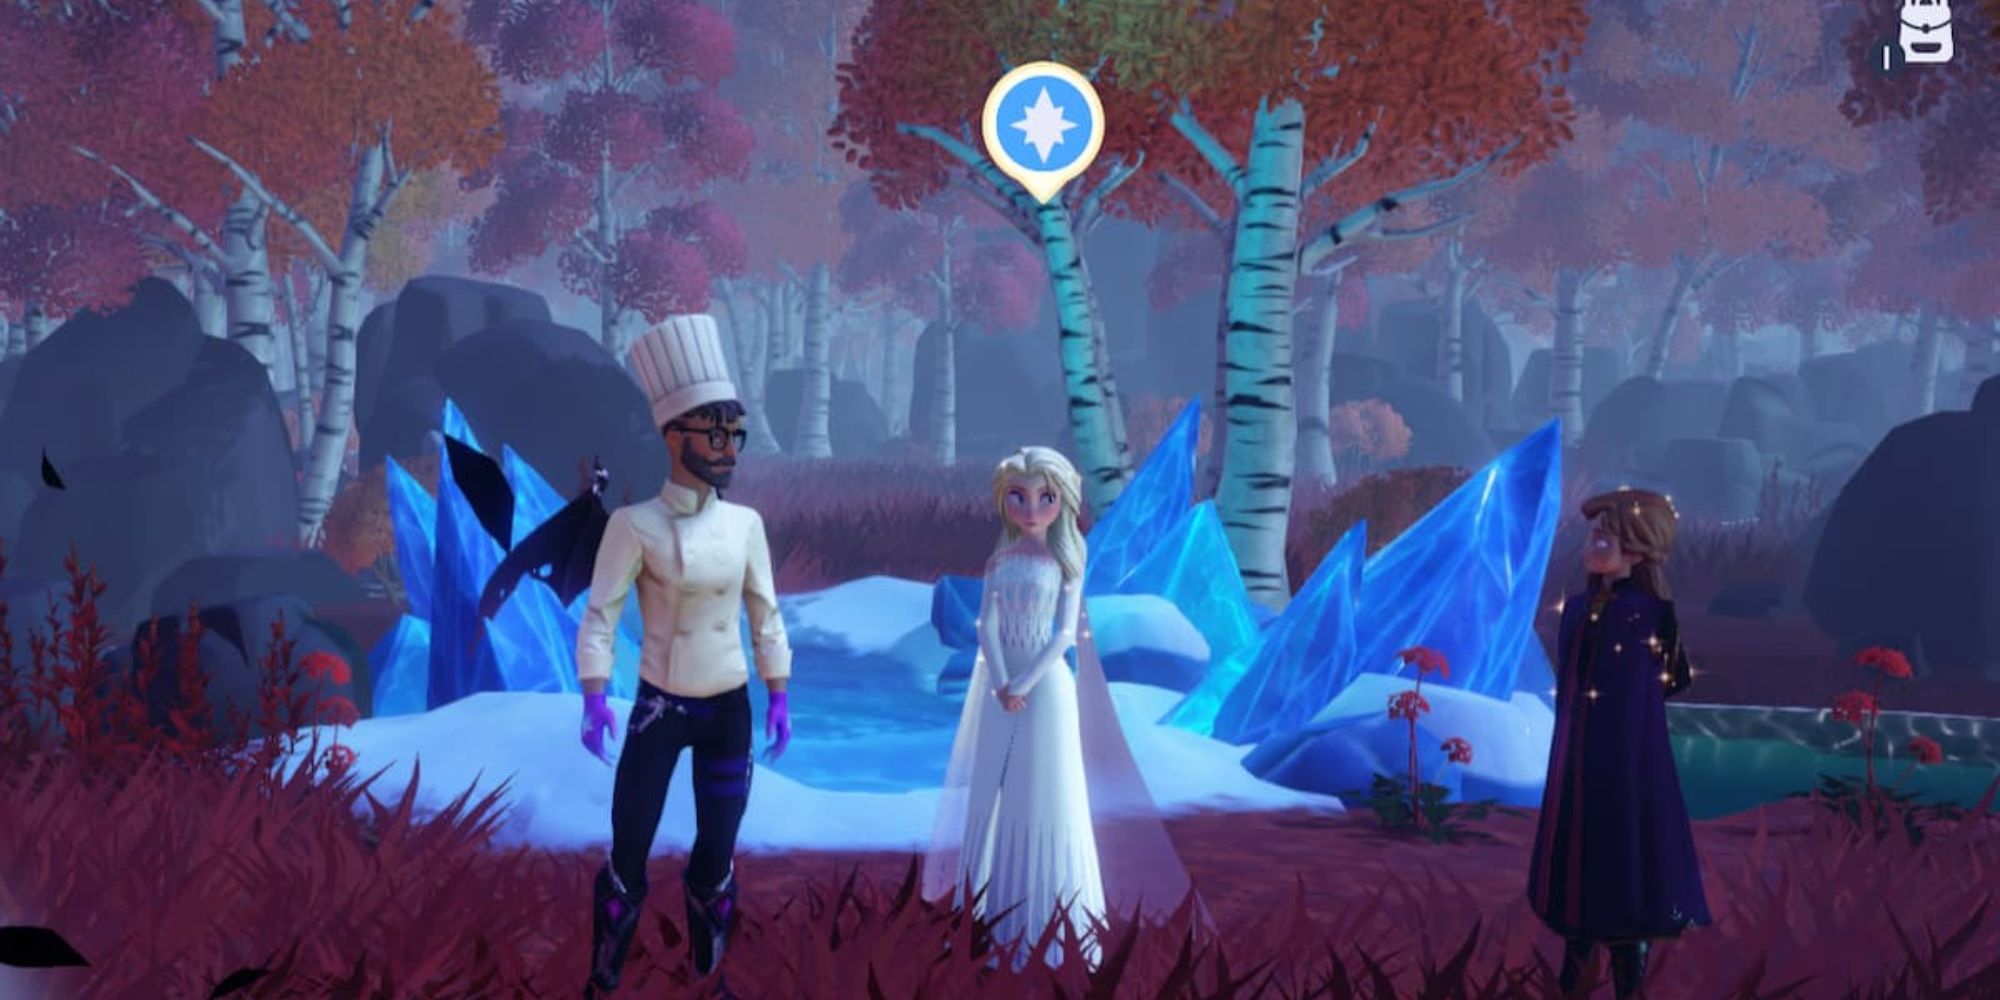 Meeting Anna and Elsa in Disney Dreamlight Valley